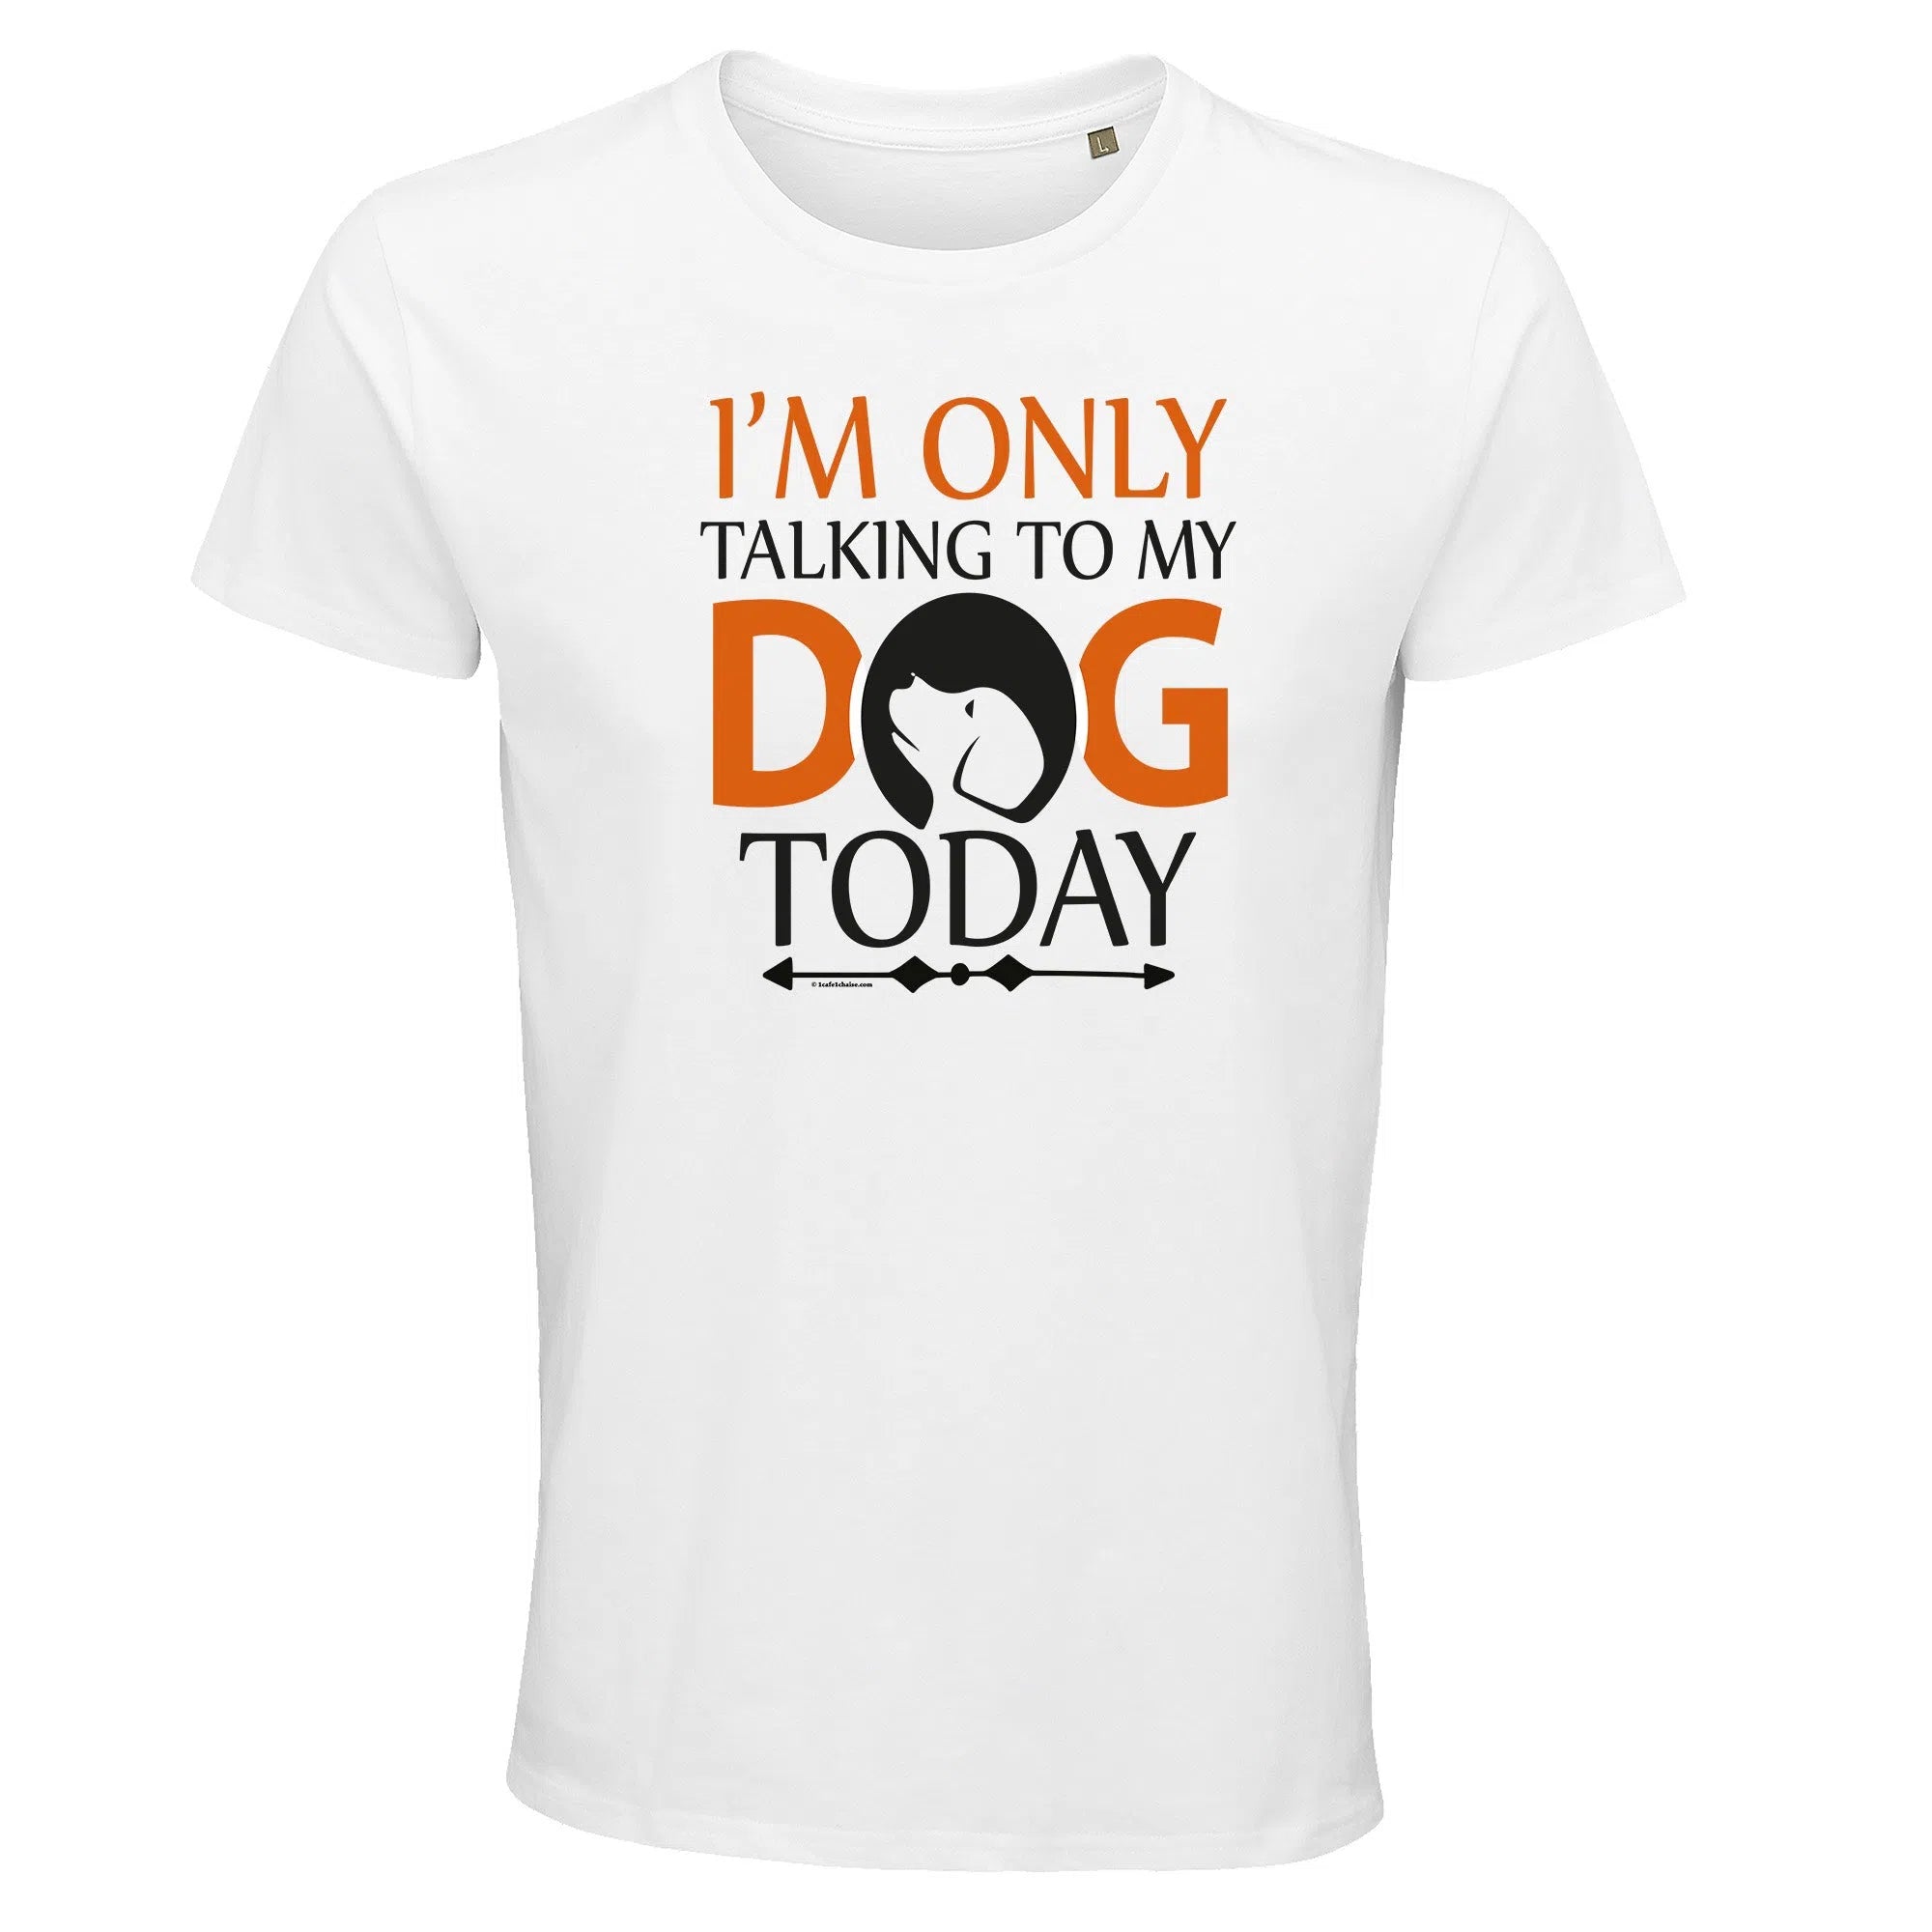 I am only talking to my dog today-Imagesdartistes